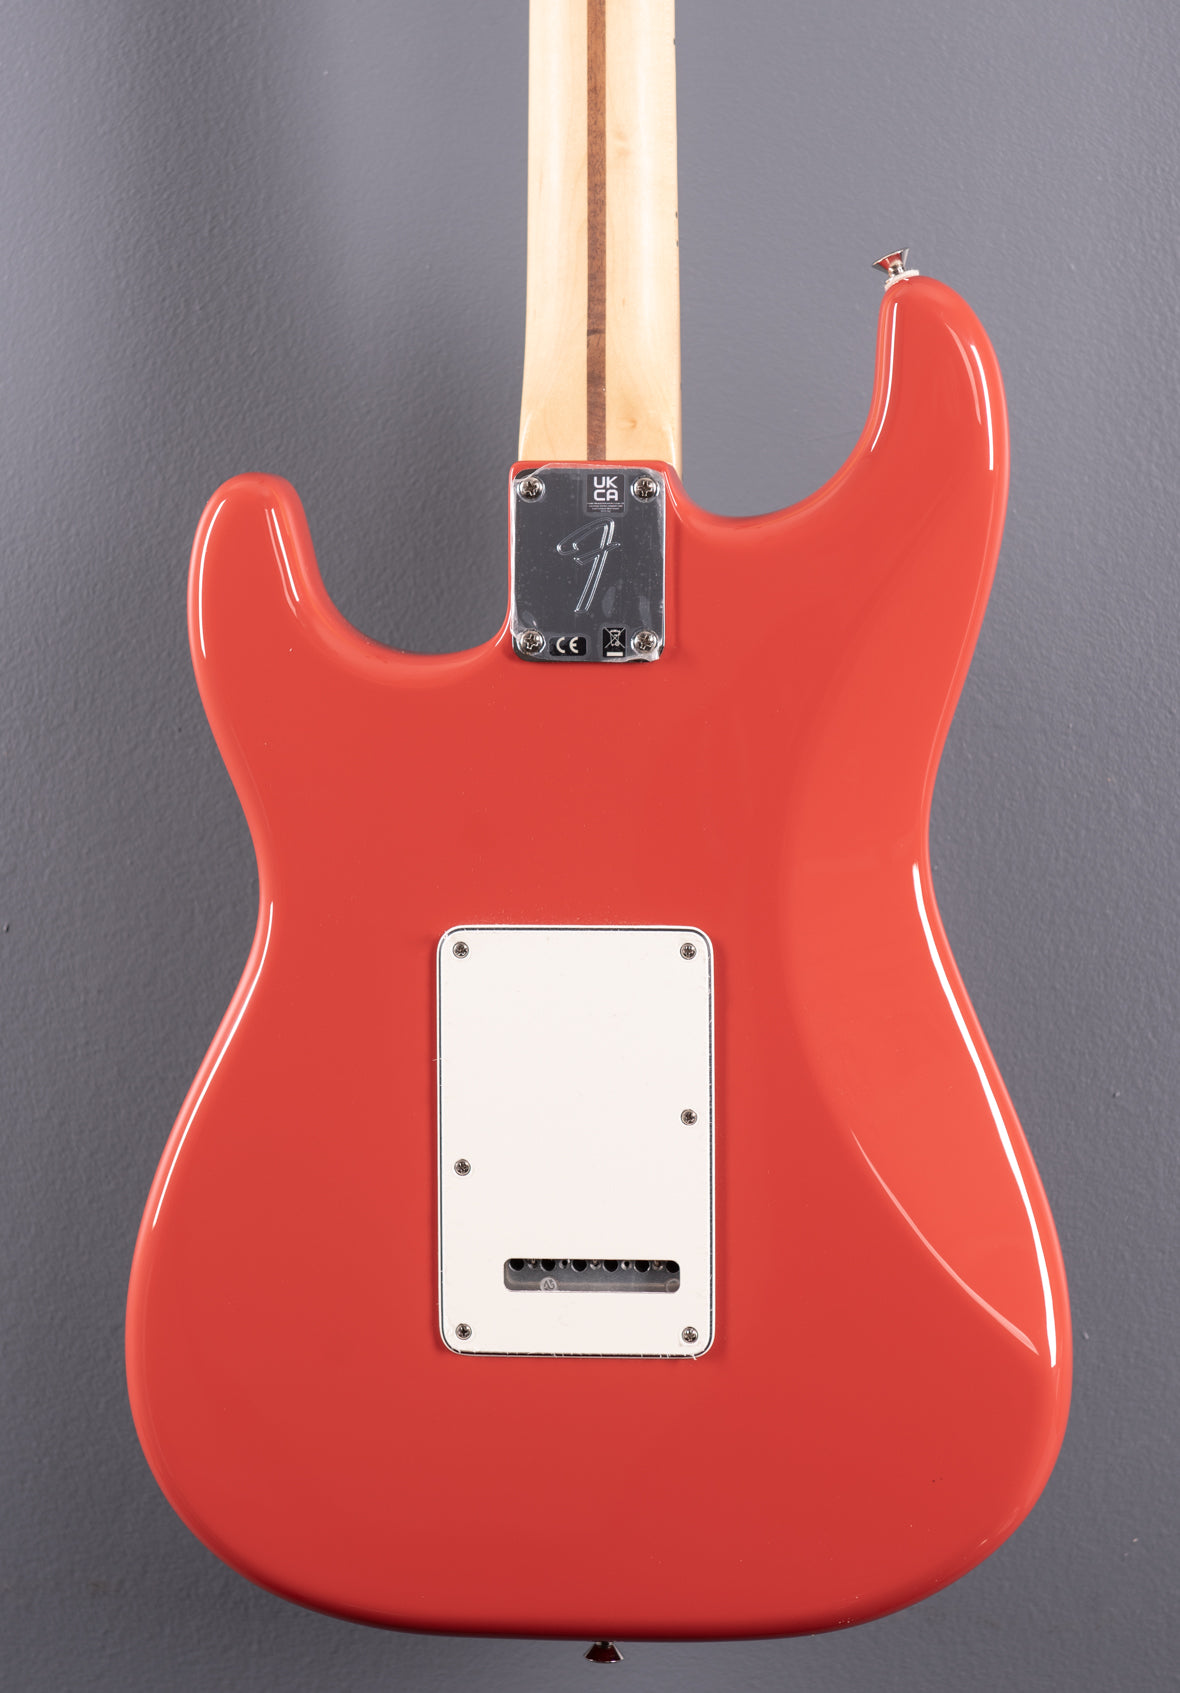 Limited Edition Player Stratocaster HSS - Fiesta Red